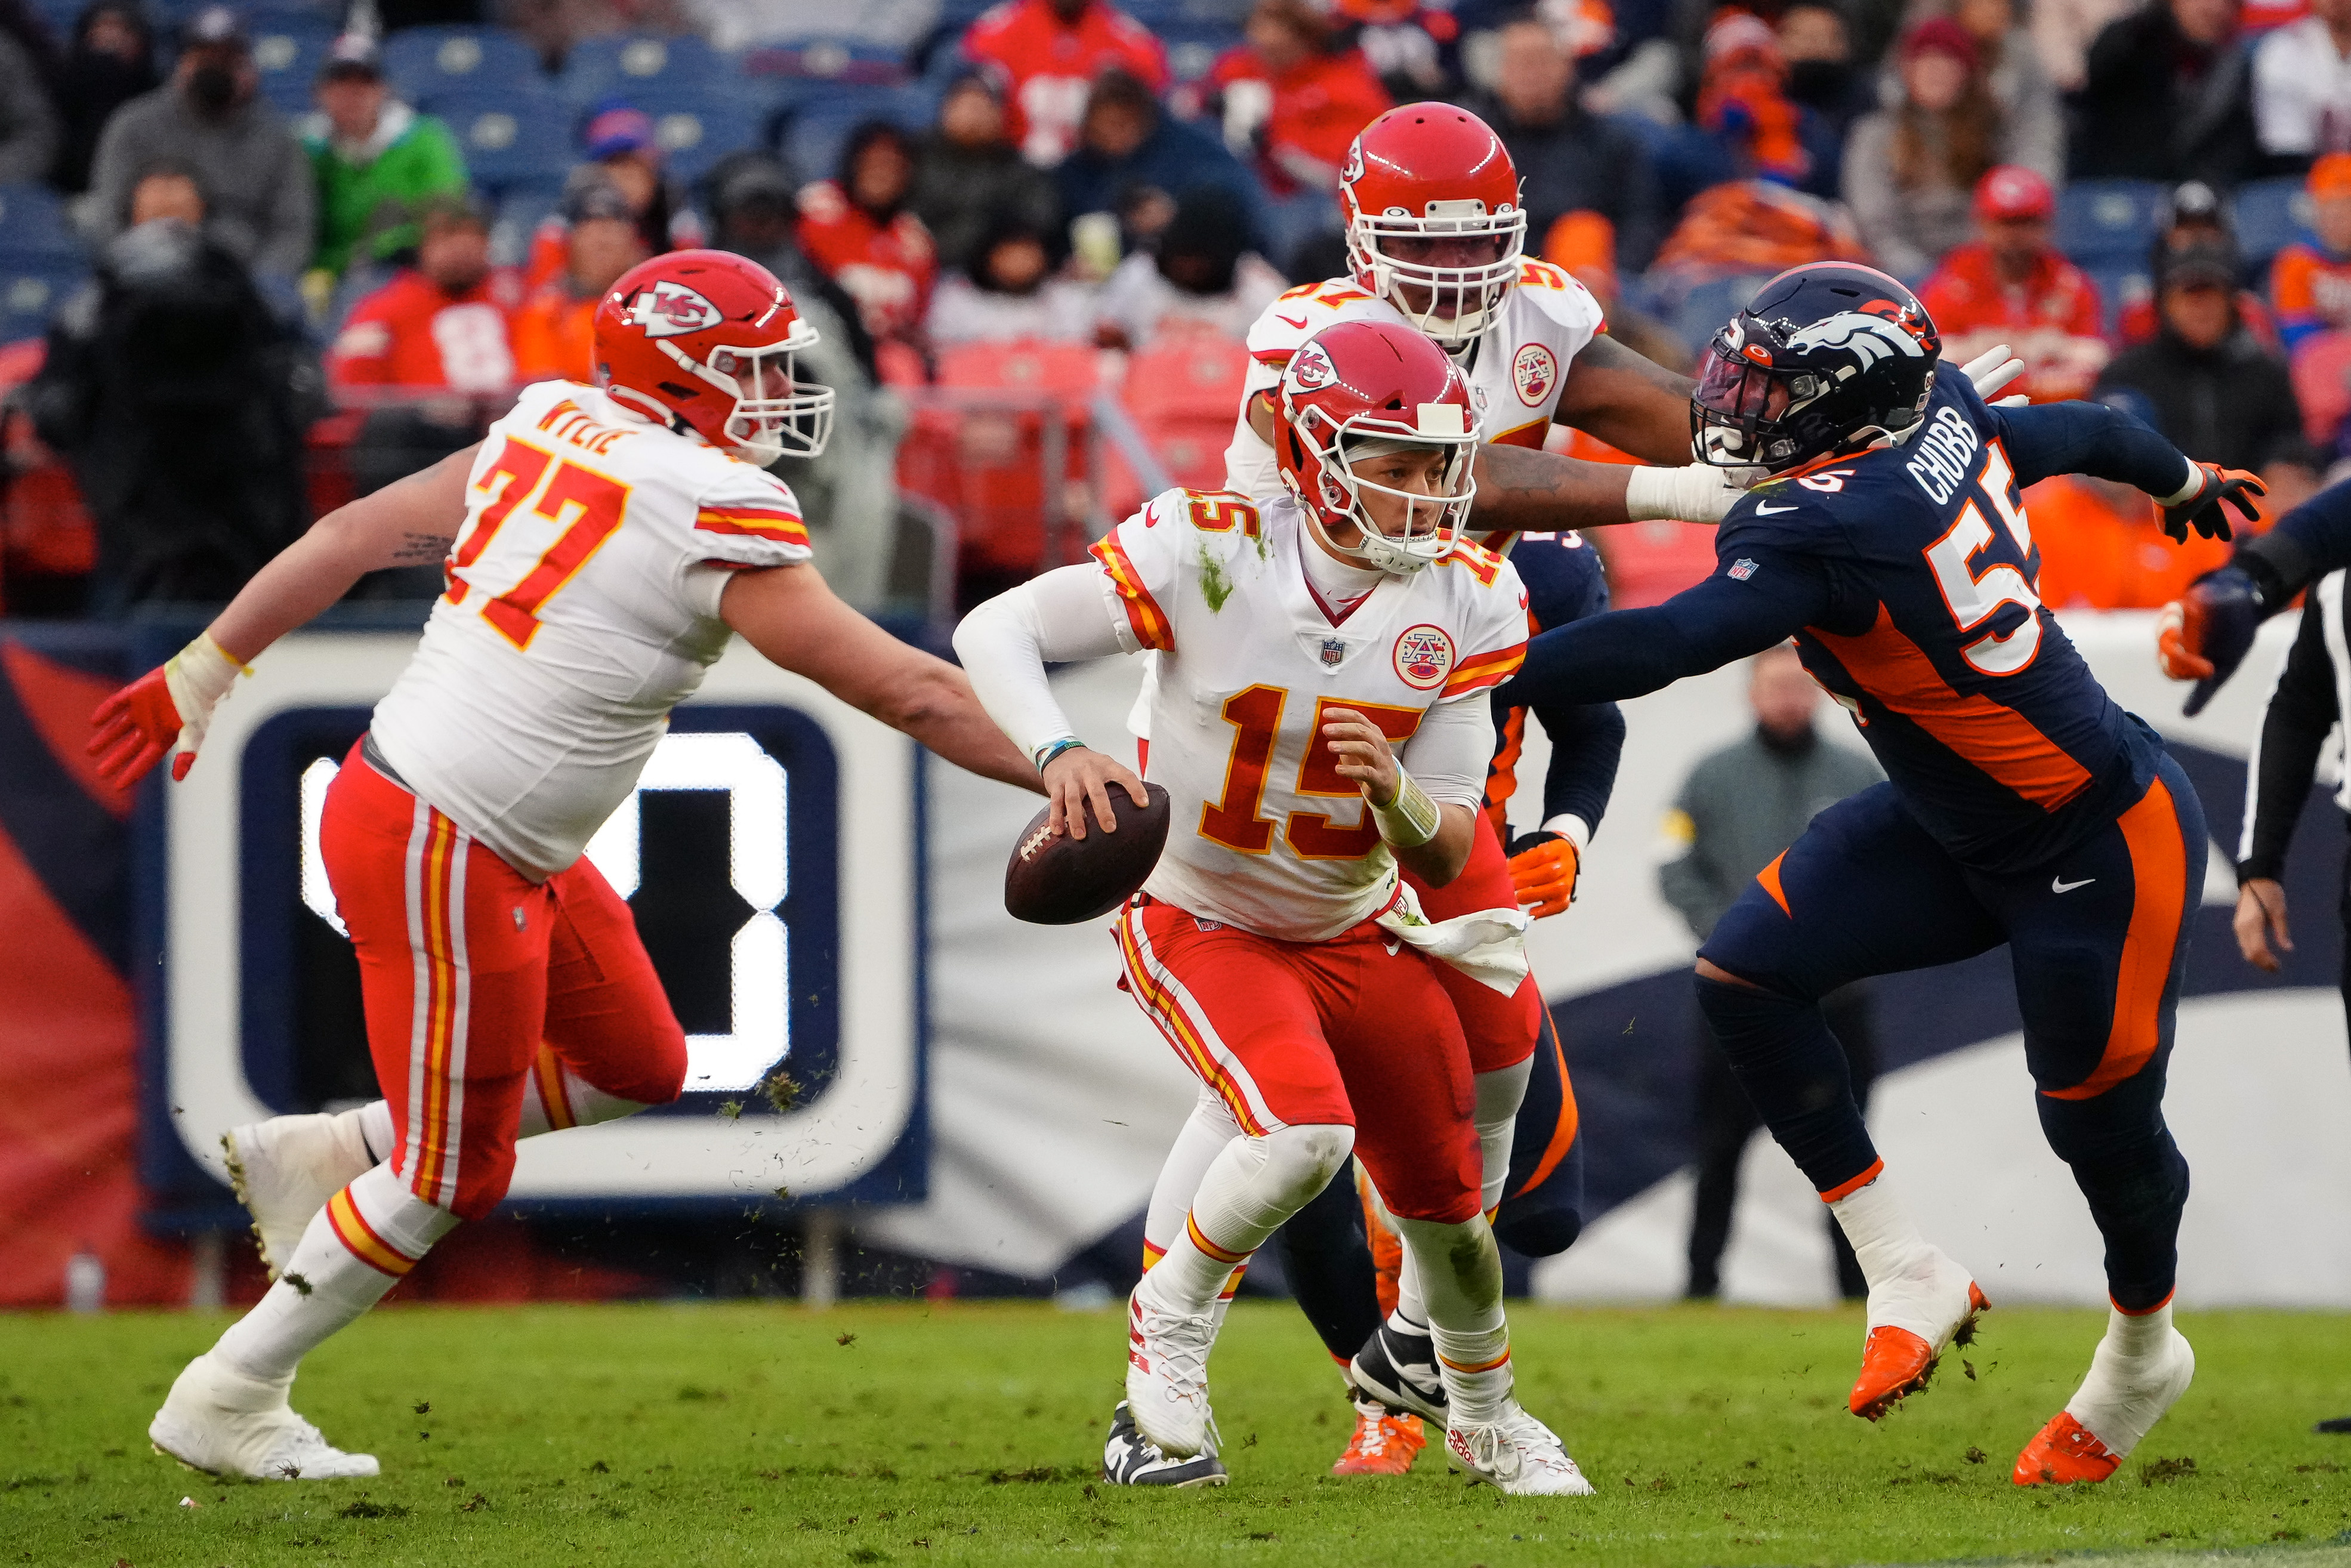 Kansas City Chiefs quarterback Patrick Mahomes (15) scrambles with the ball ahead of guard Andrew Wylie (77) as offensive tackle Orlando Brown (57) defends against Denver Broncos outside linebacker Bradley Chubb (55) in the third quarter at Empower Field at Mile High.